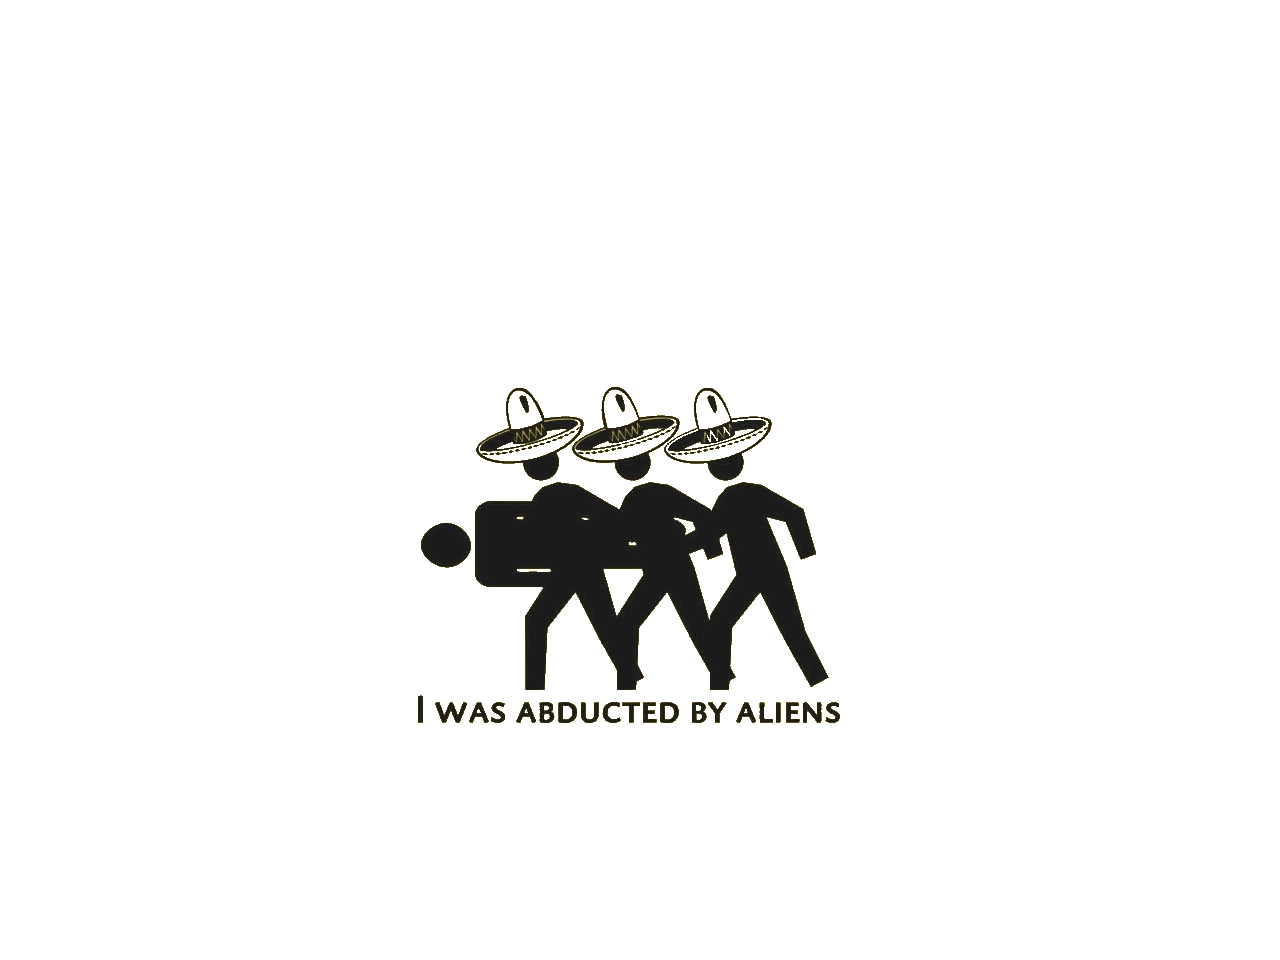 Funny Backgrounds - Abducted By Aliens Background - HD Wallpaper 